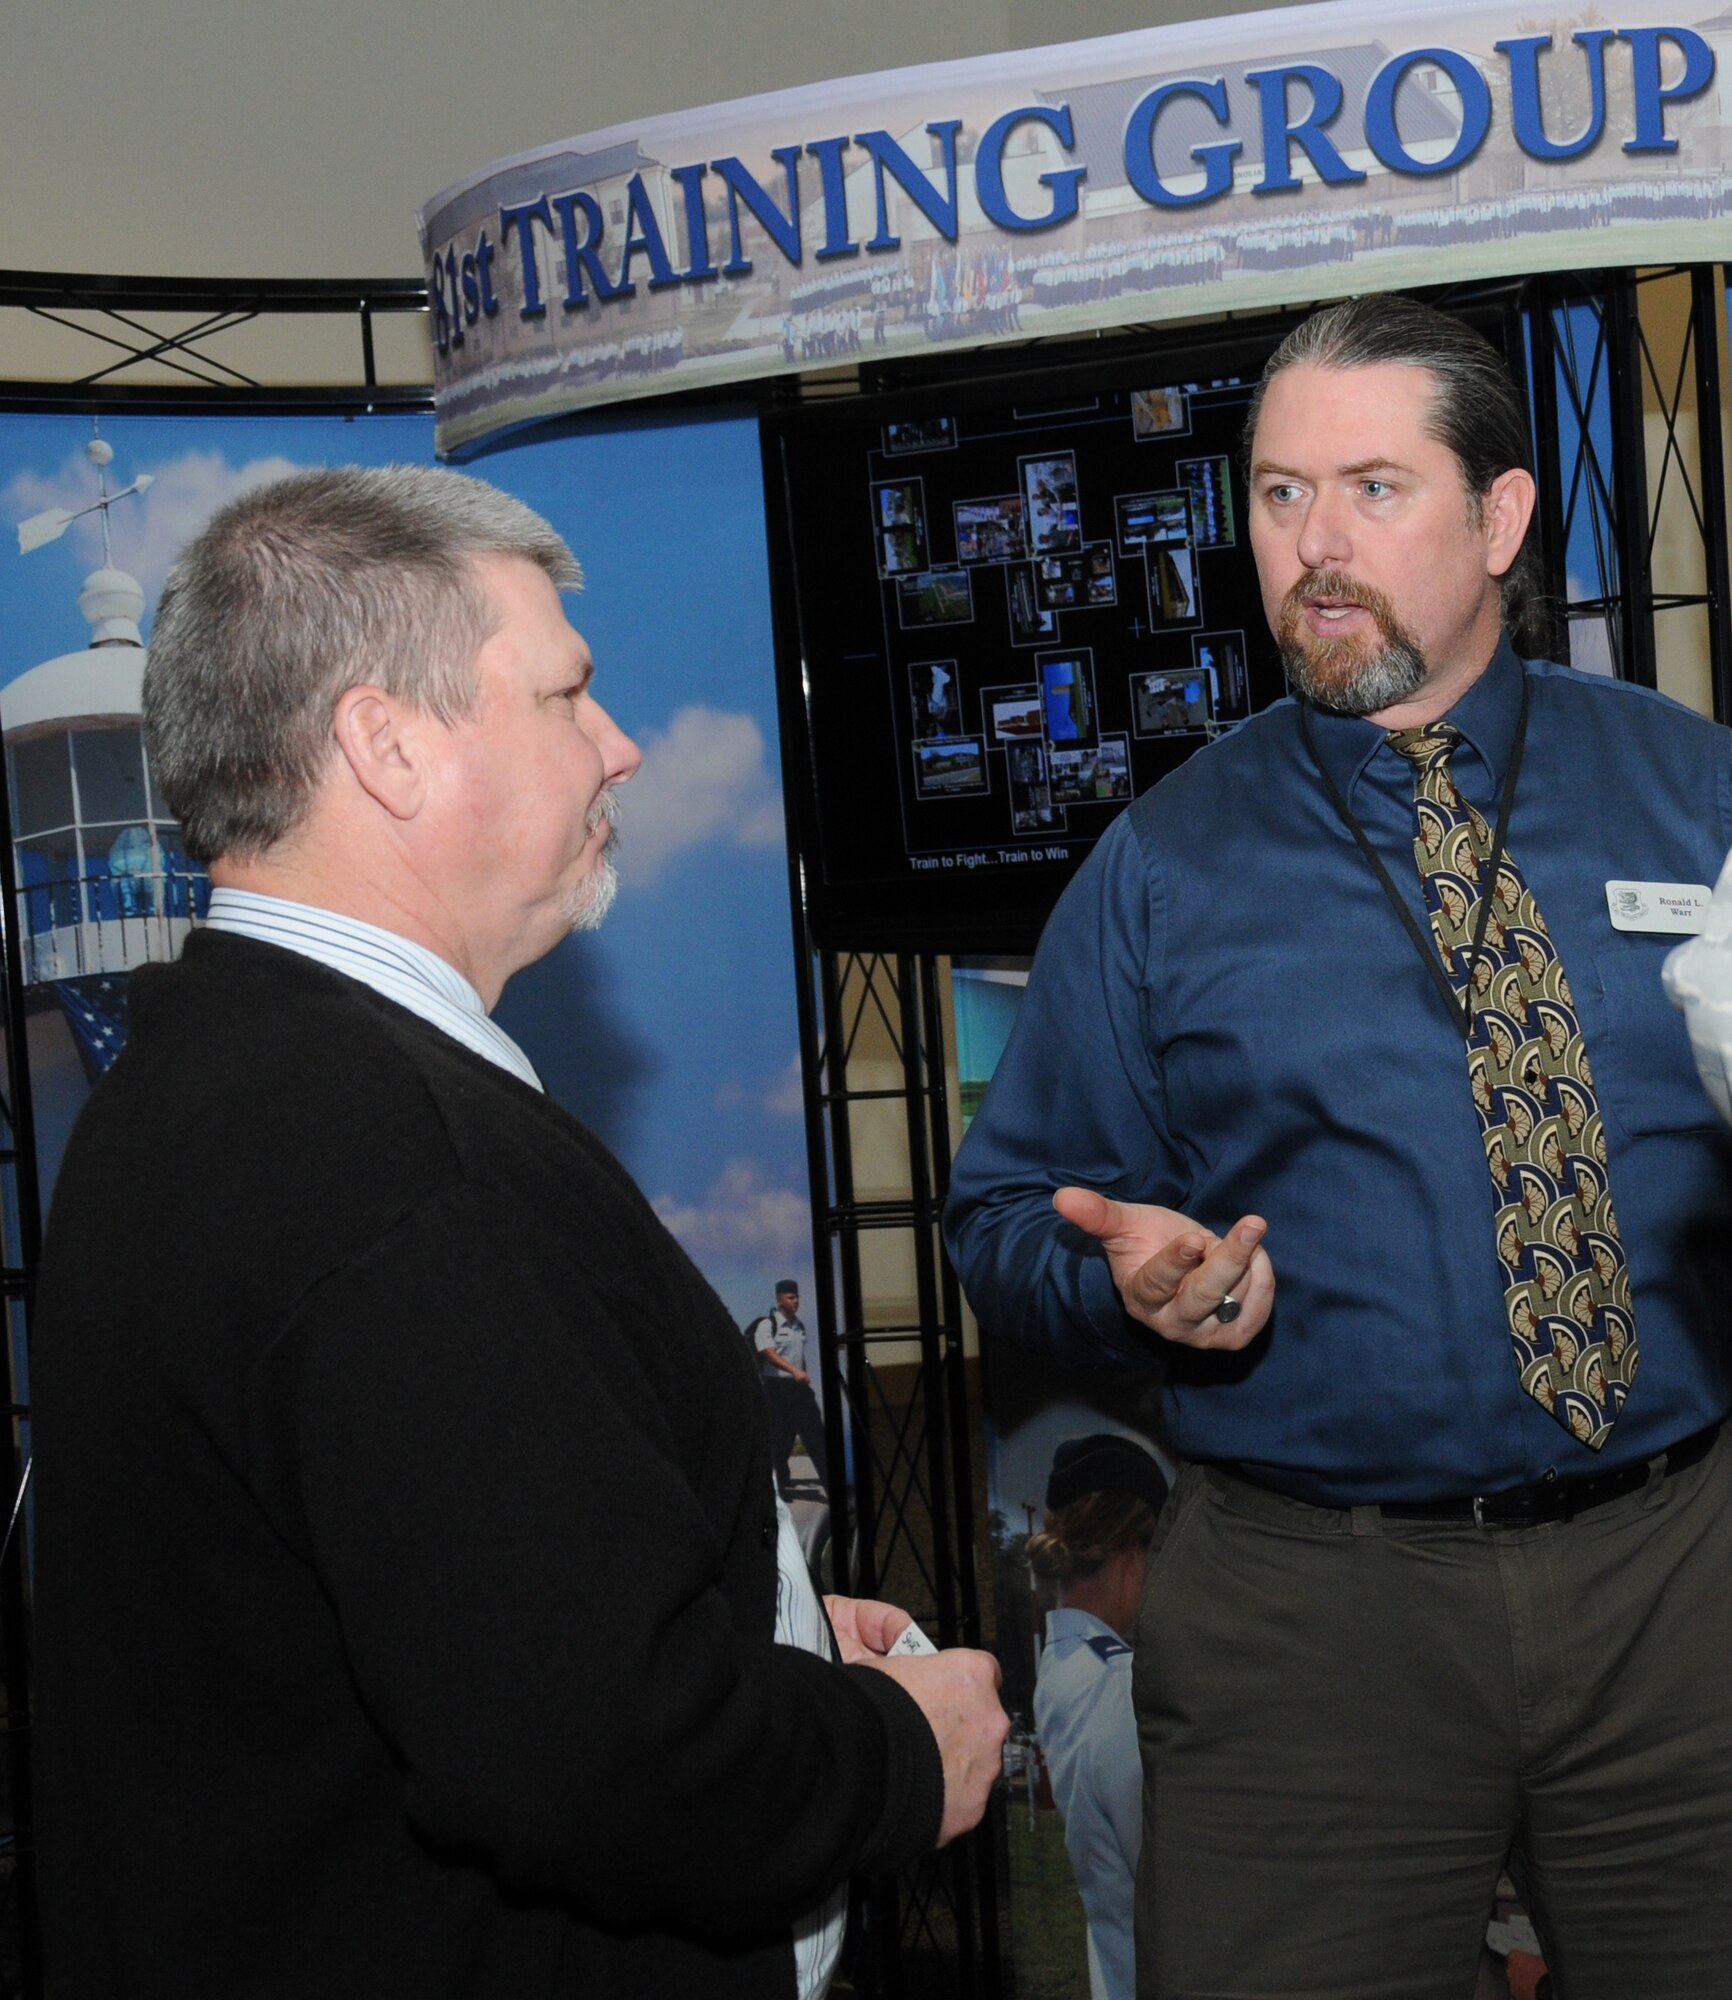 Mike Ritter, 2nd Air Force, discusses the future of technical training development within the Air Force Instructional Technology Units with Ronald Warr, 81st Training Support Squadron, during a technology expo Jan. 9, 2012, at the Roberts Consolidated Aircraft Maintenance Facility, Keesler Air Force Base, Miss.  The 17th annual free expo, hosted by the 81st TRSS, featured more than 40 exhibitors.  (U.S. Air Force photo by Kemberly Groue)